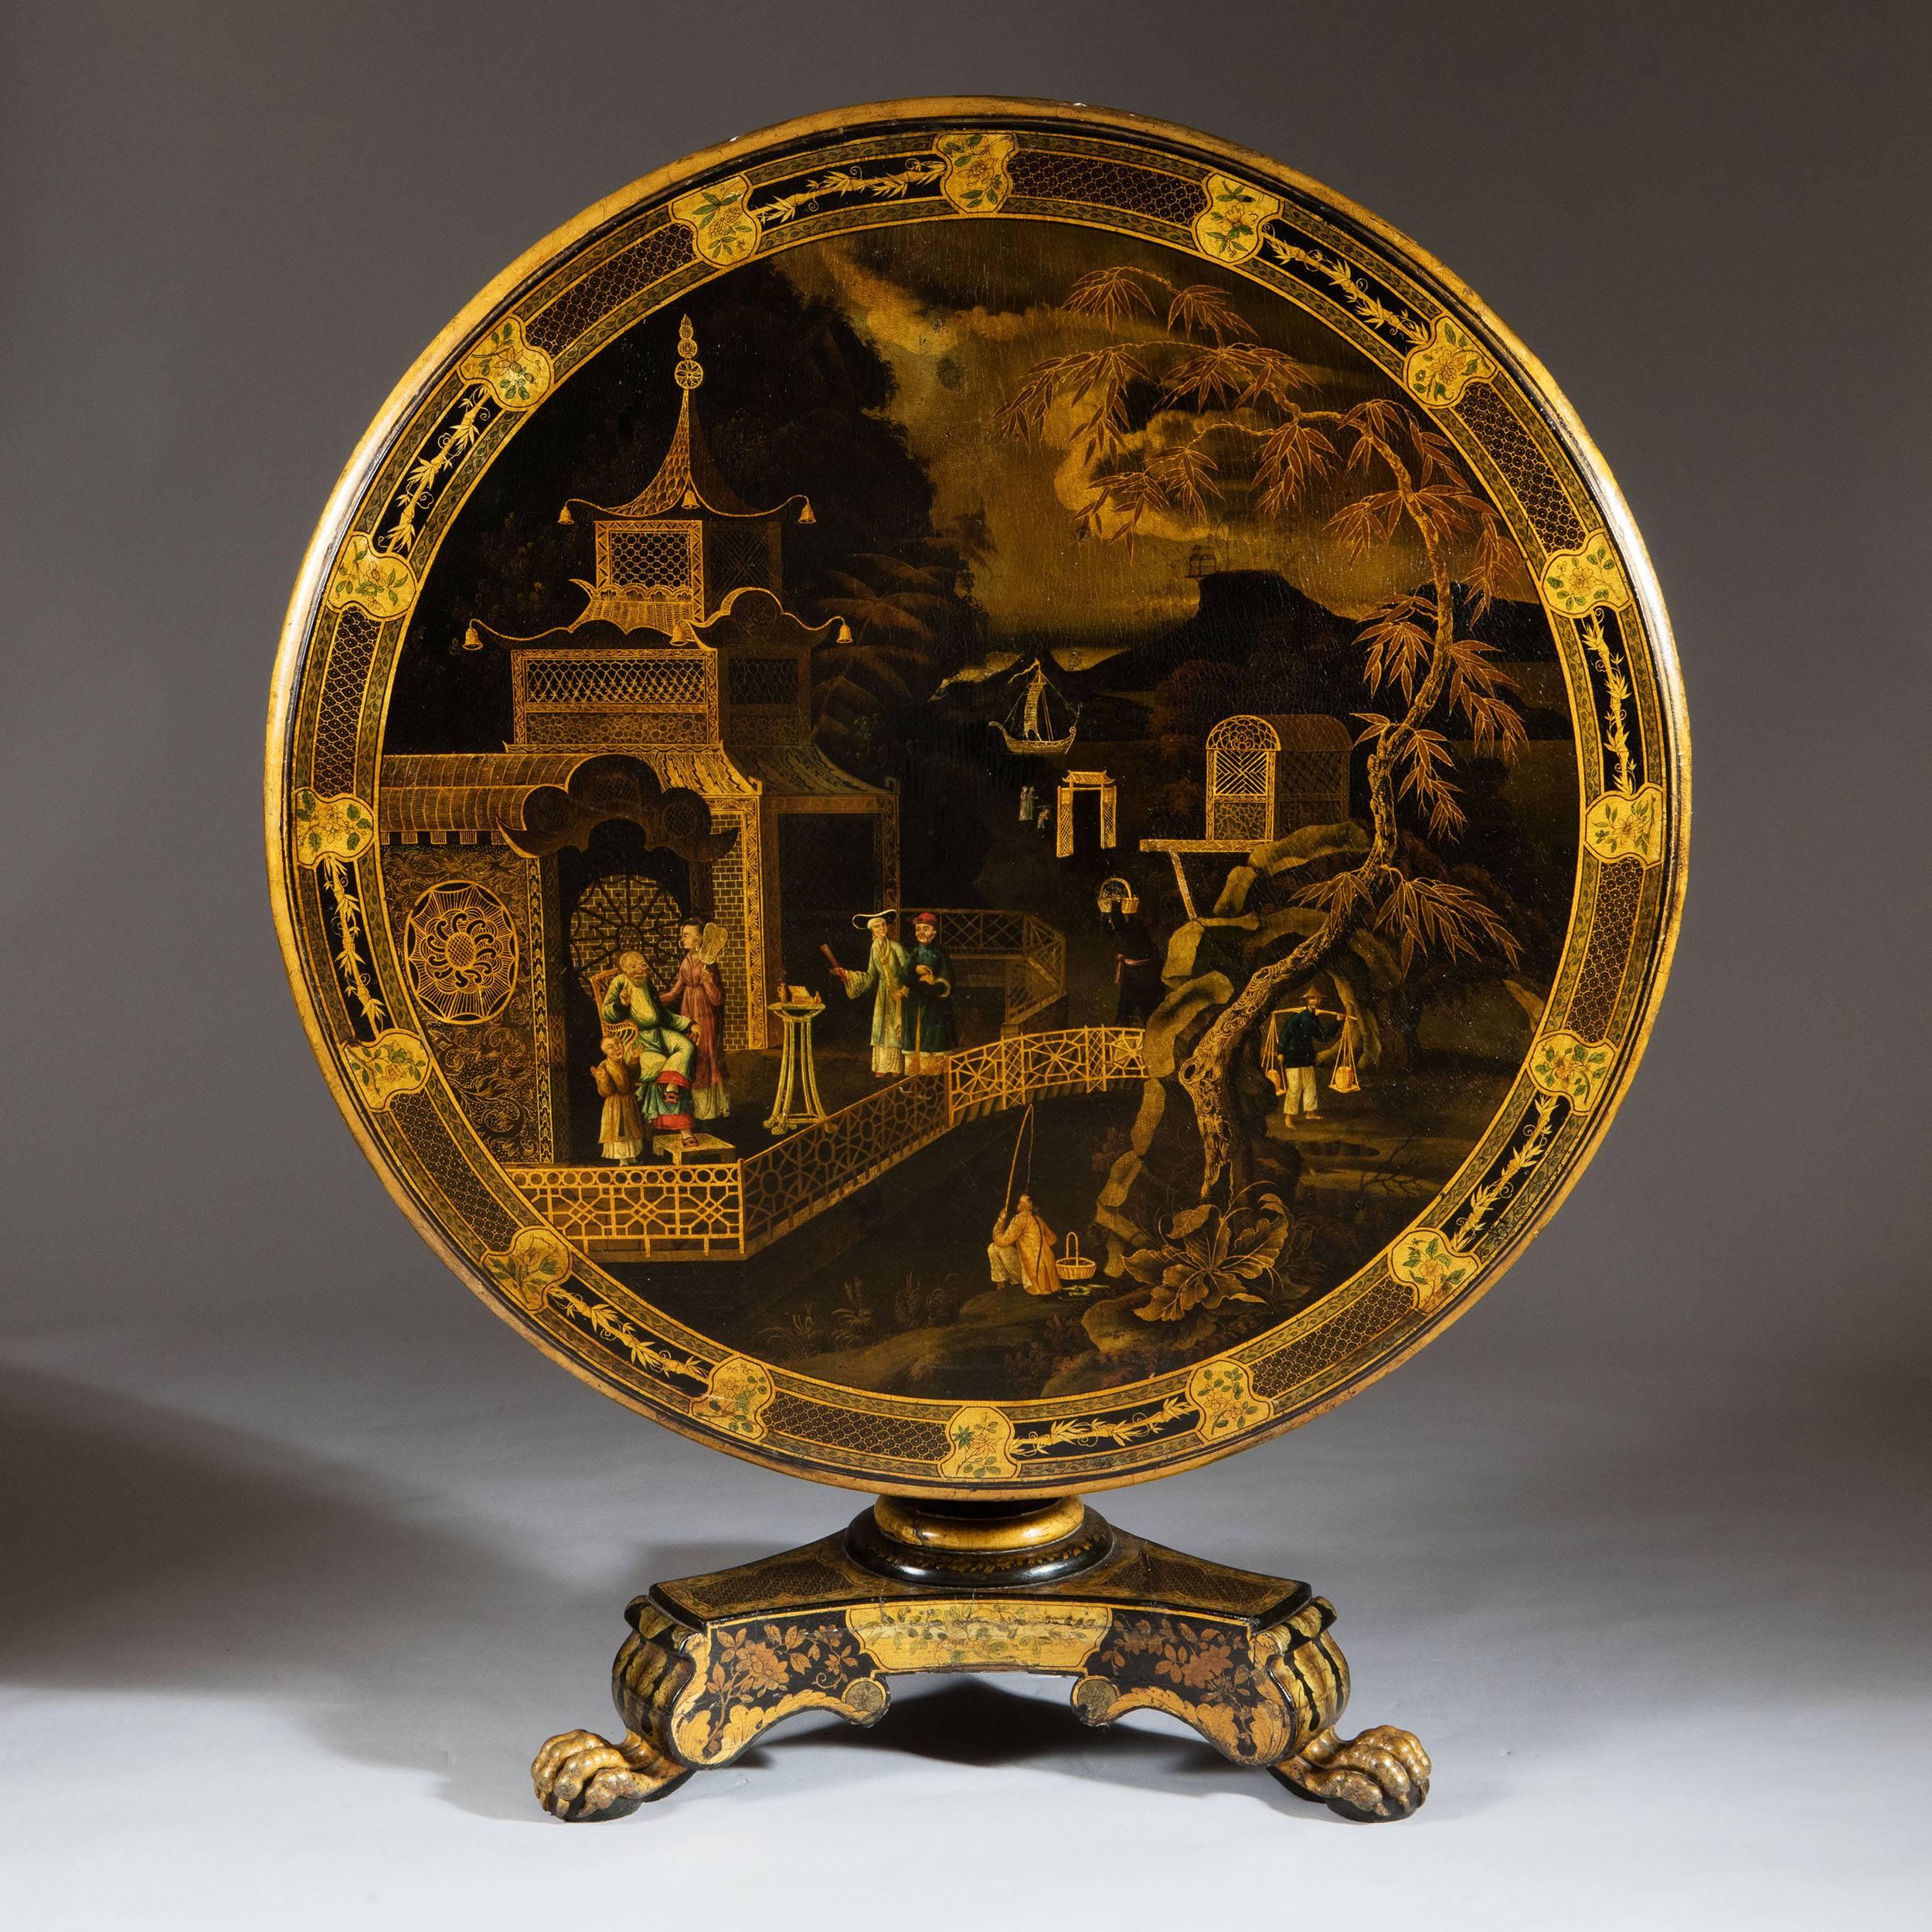 An exceptional and very rare early 19th century Regency period Chinese export lacquer center table decorated though out with scenes of daily life amongst pagoda's rivers and landscape. The circular top raised on a turned base with triform base and